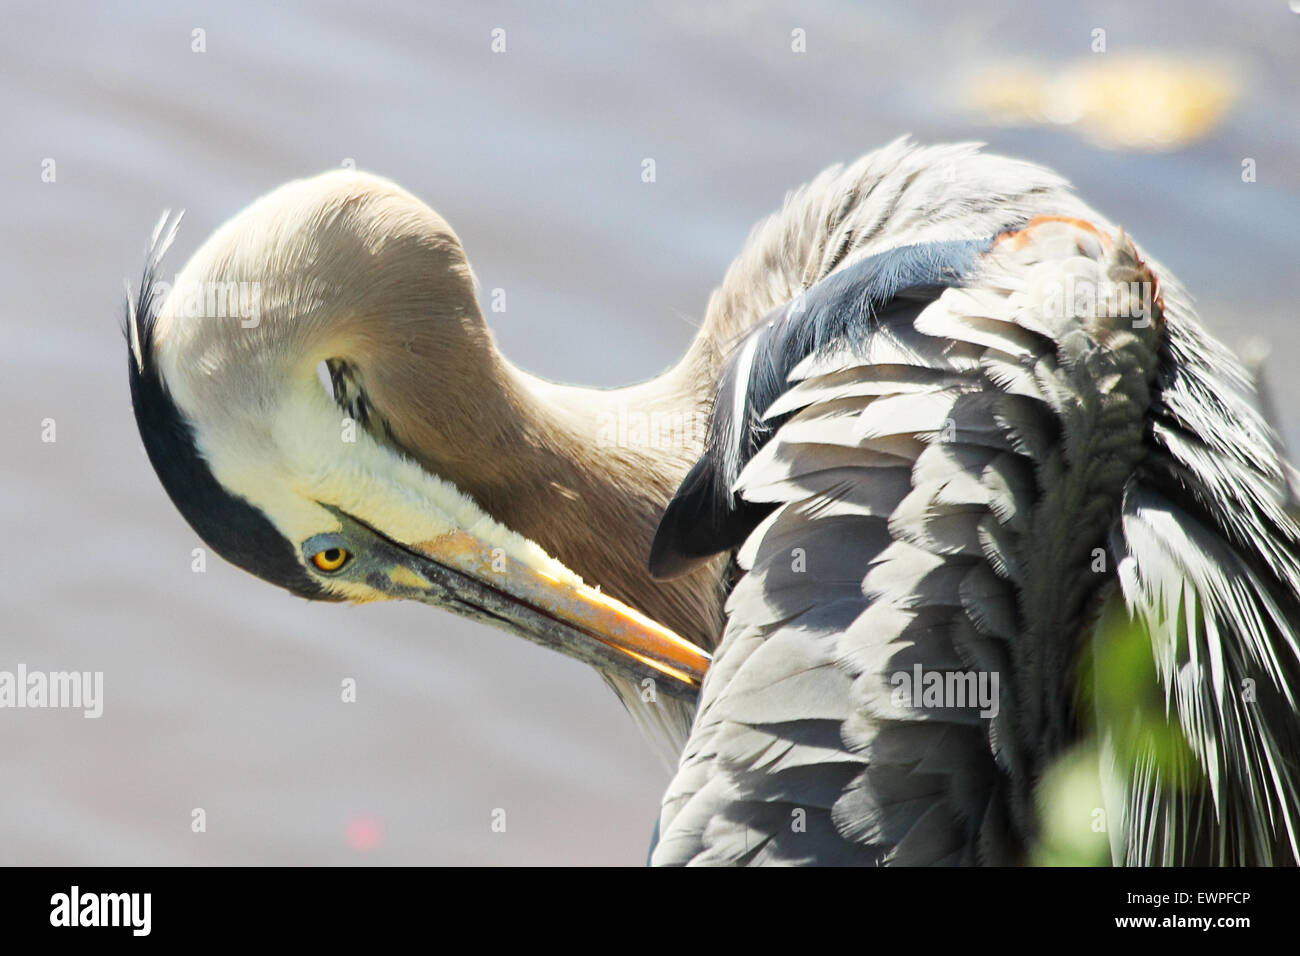 A Great blue heron preening at the waters edge. Stock Photo